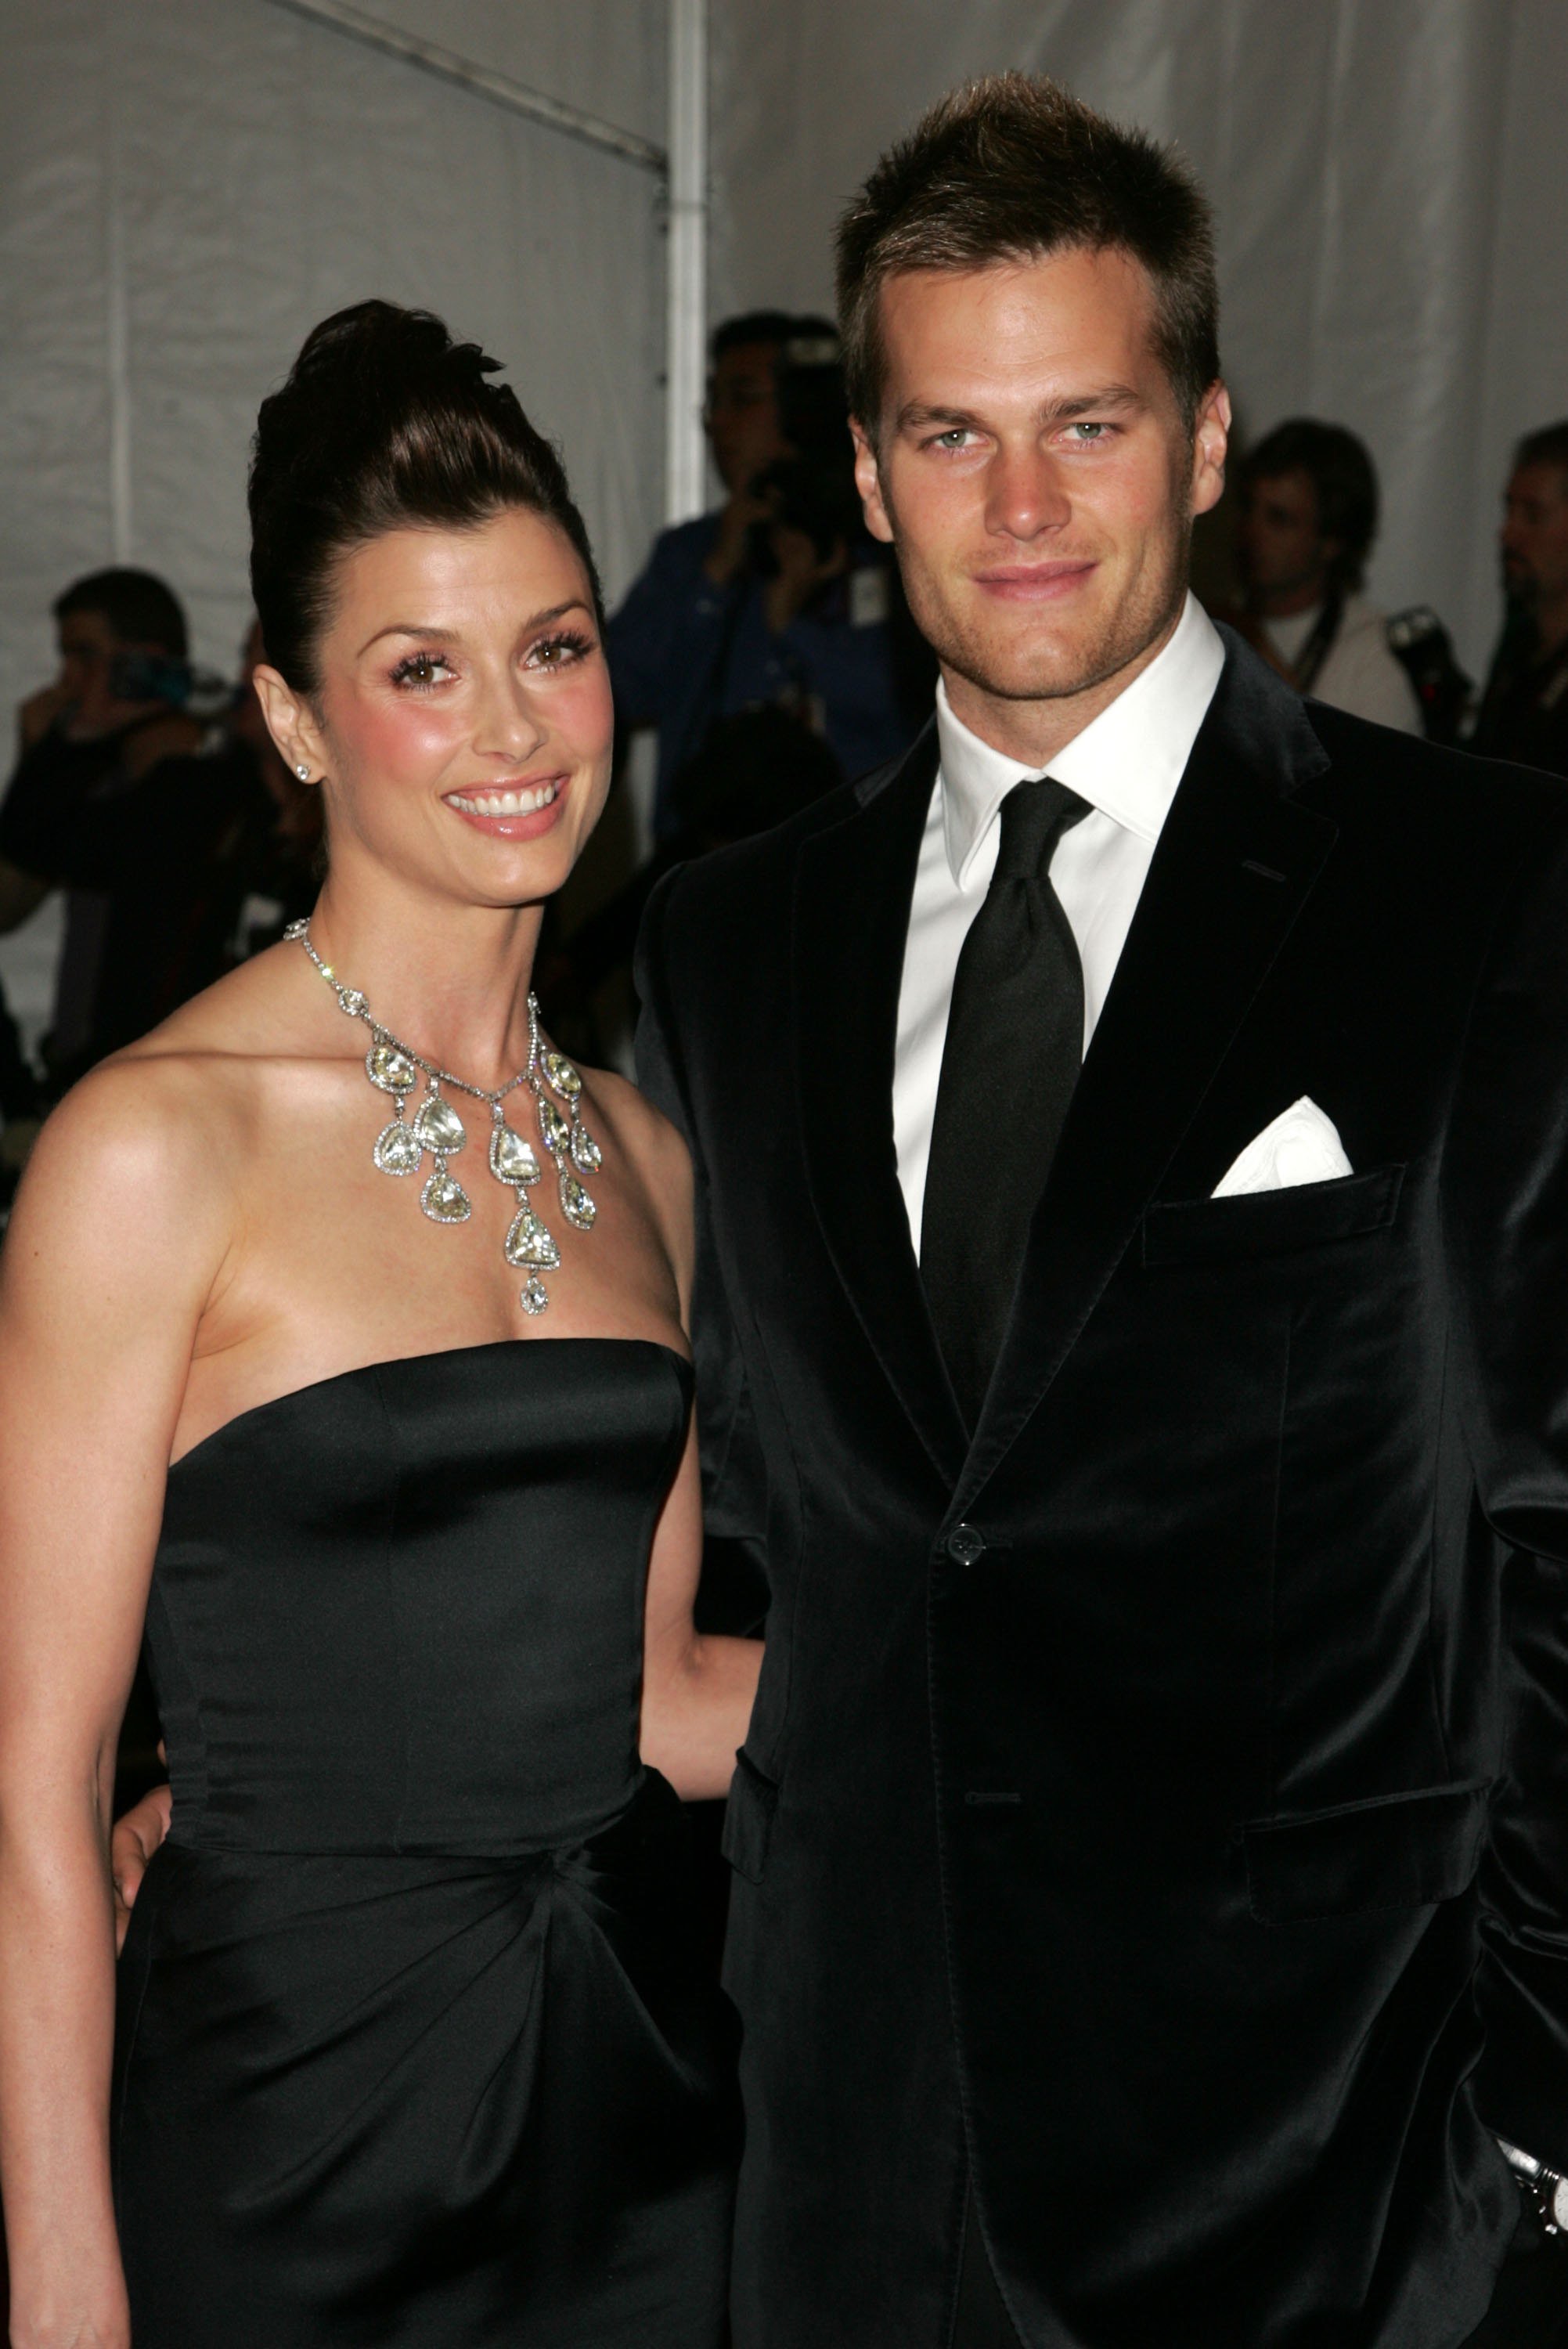 Bridget Moynahan and Tom Brady at the Metropolitan Museum of Art Costume Institute Benefit Gala on May 1, 2006 | Source: Getty Images